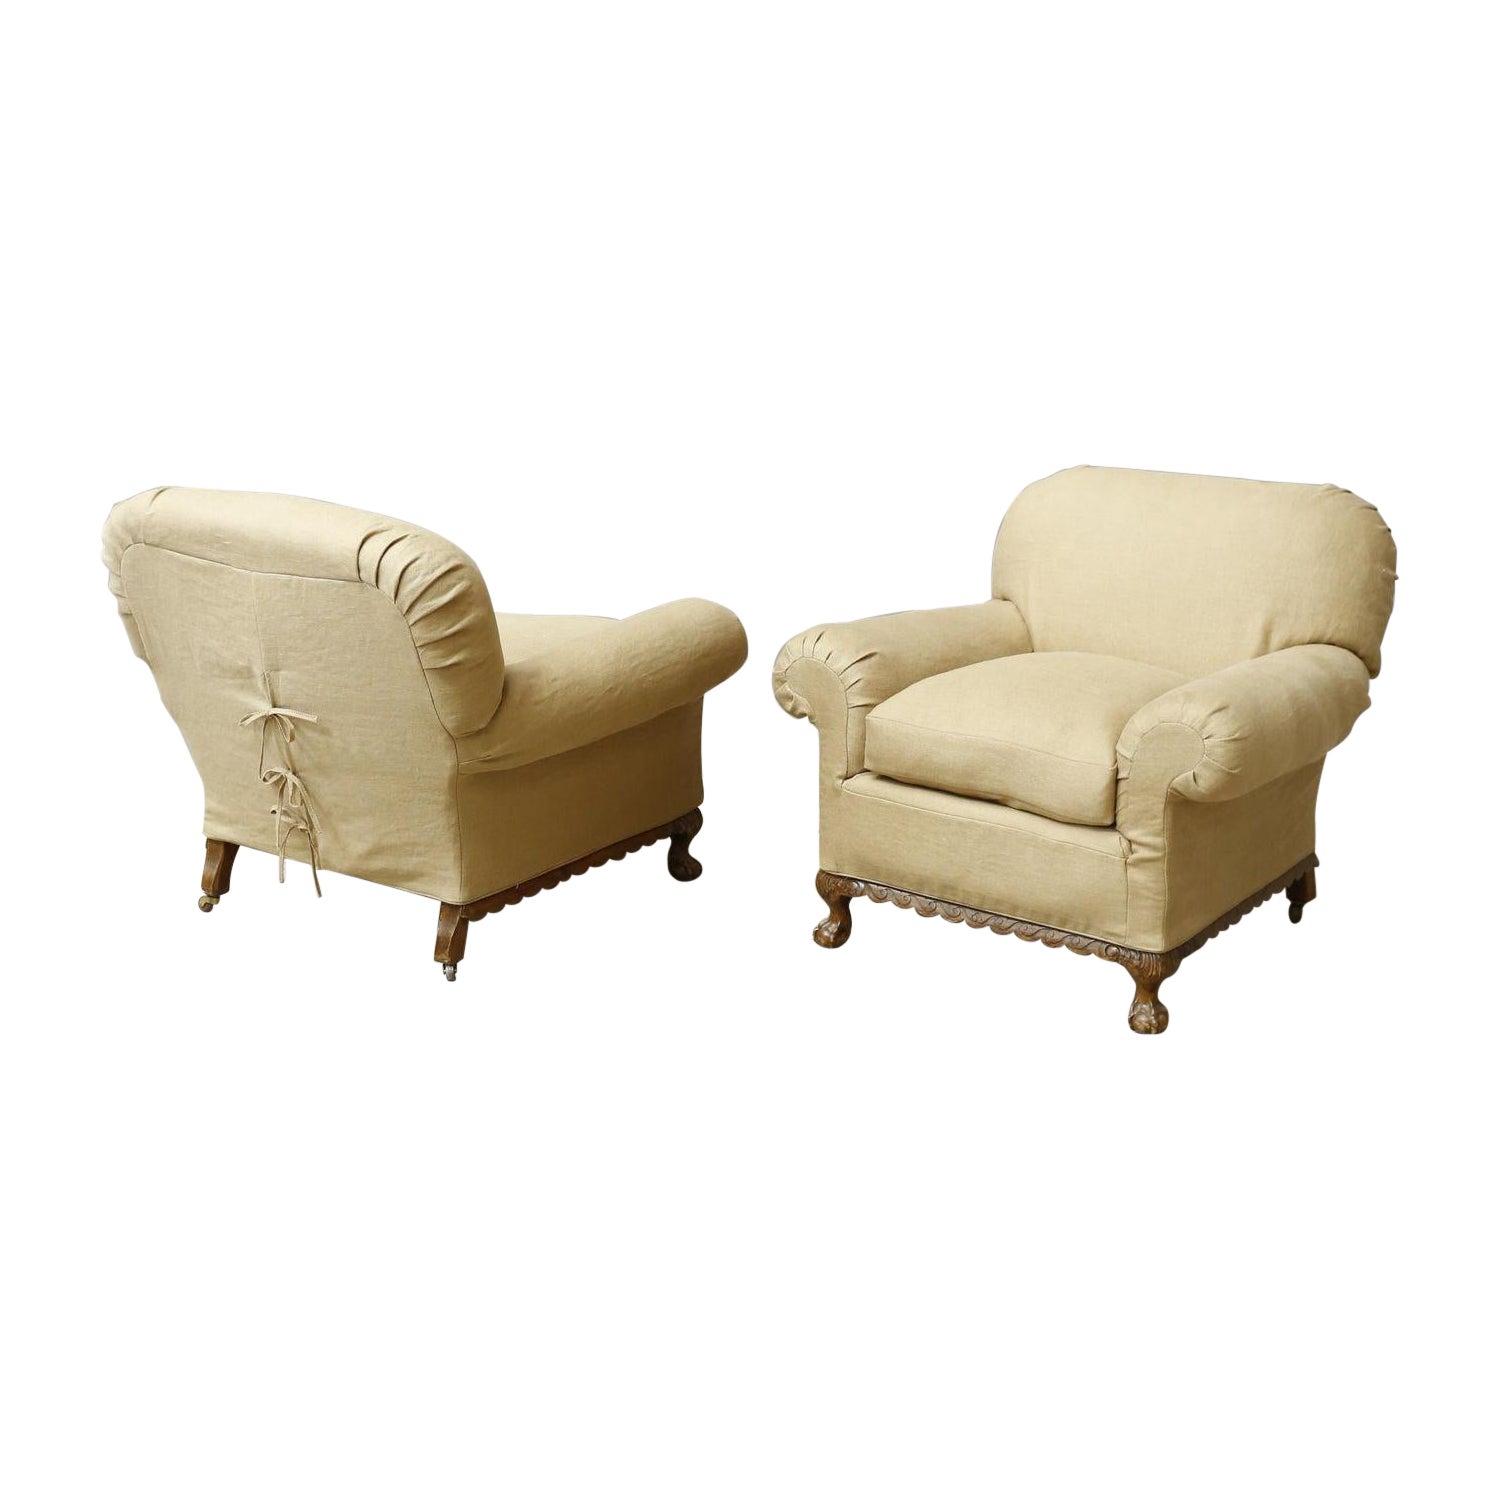 Pair of Early 20th century country house armchairs